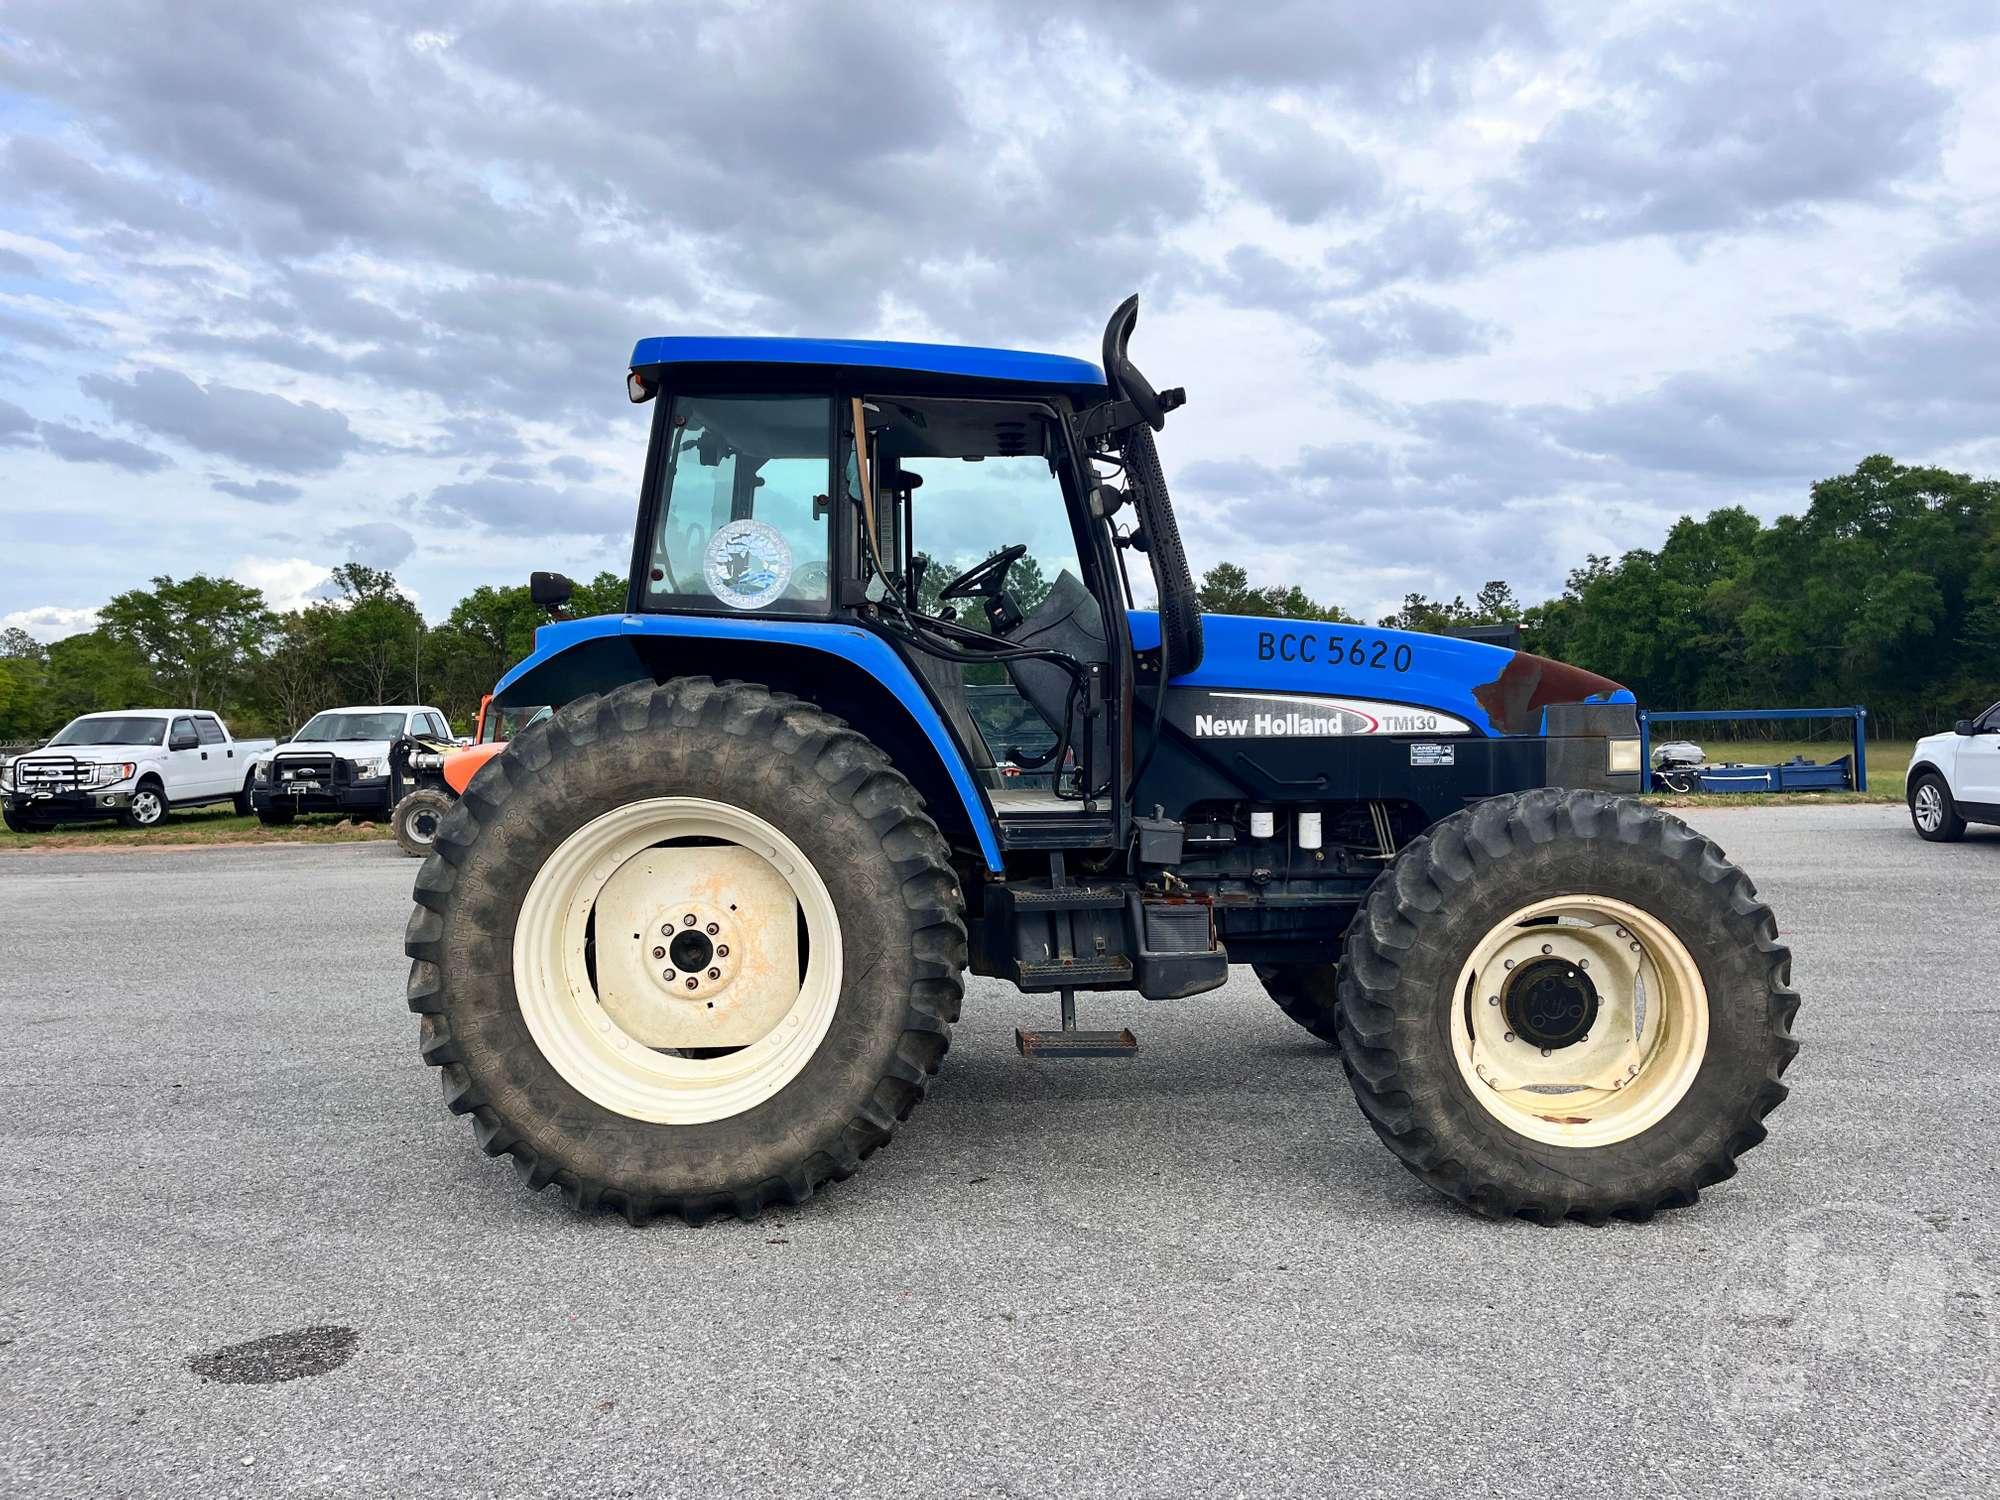 NEW HOLLAND TM130 4X4 TRACTOR SN: 178944